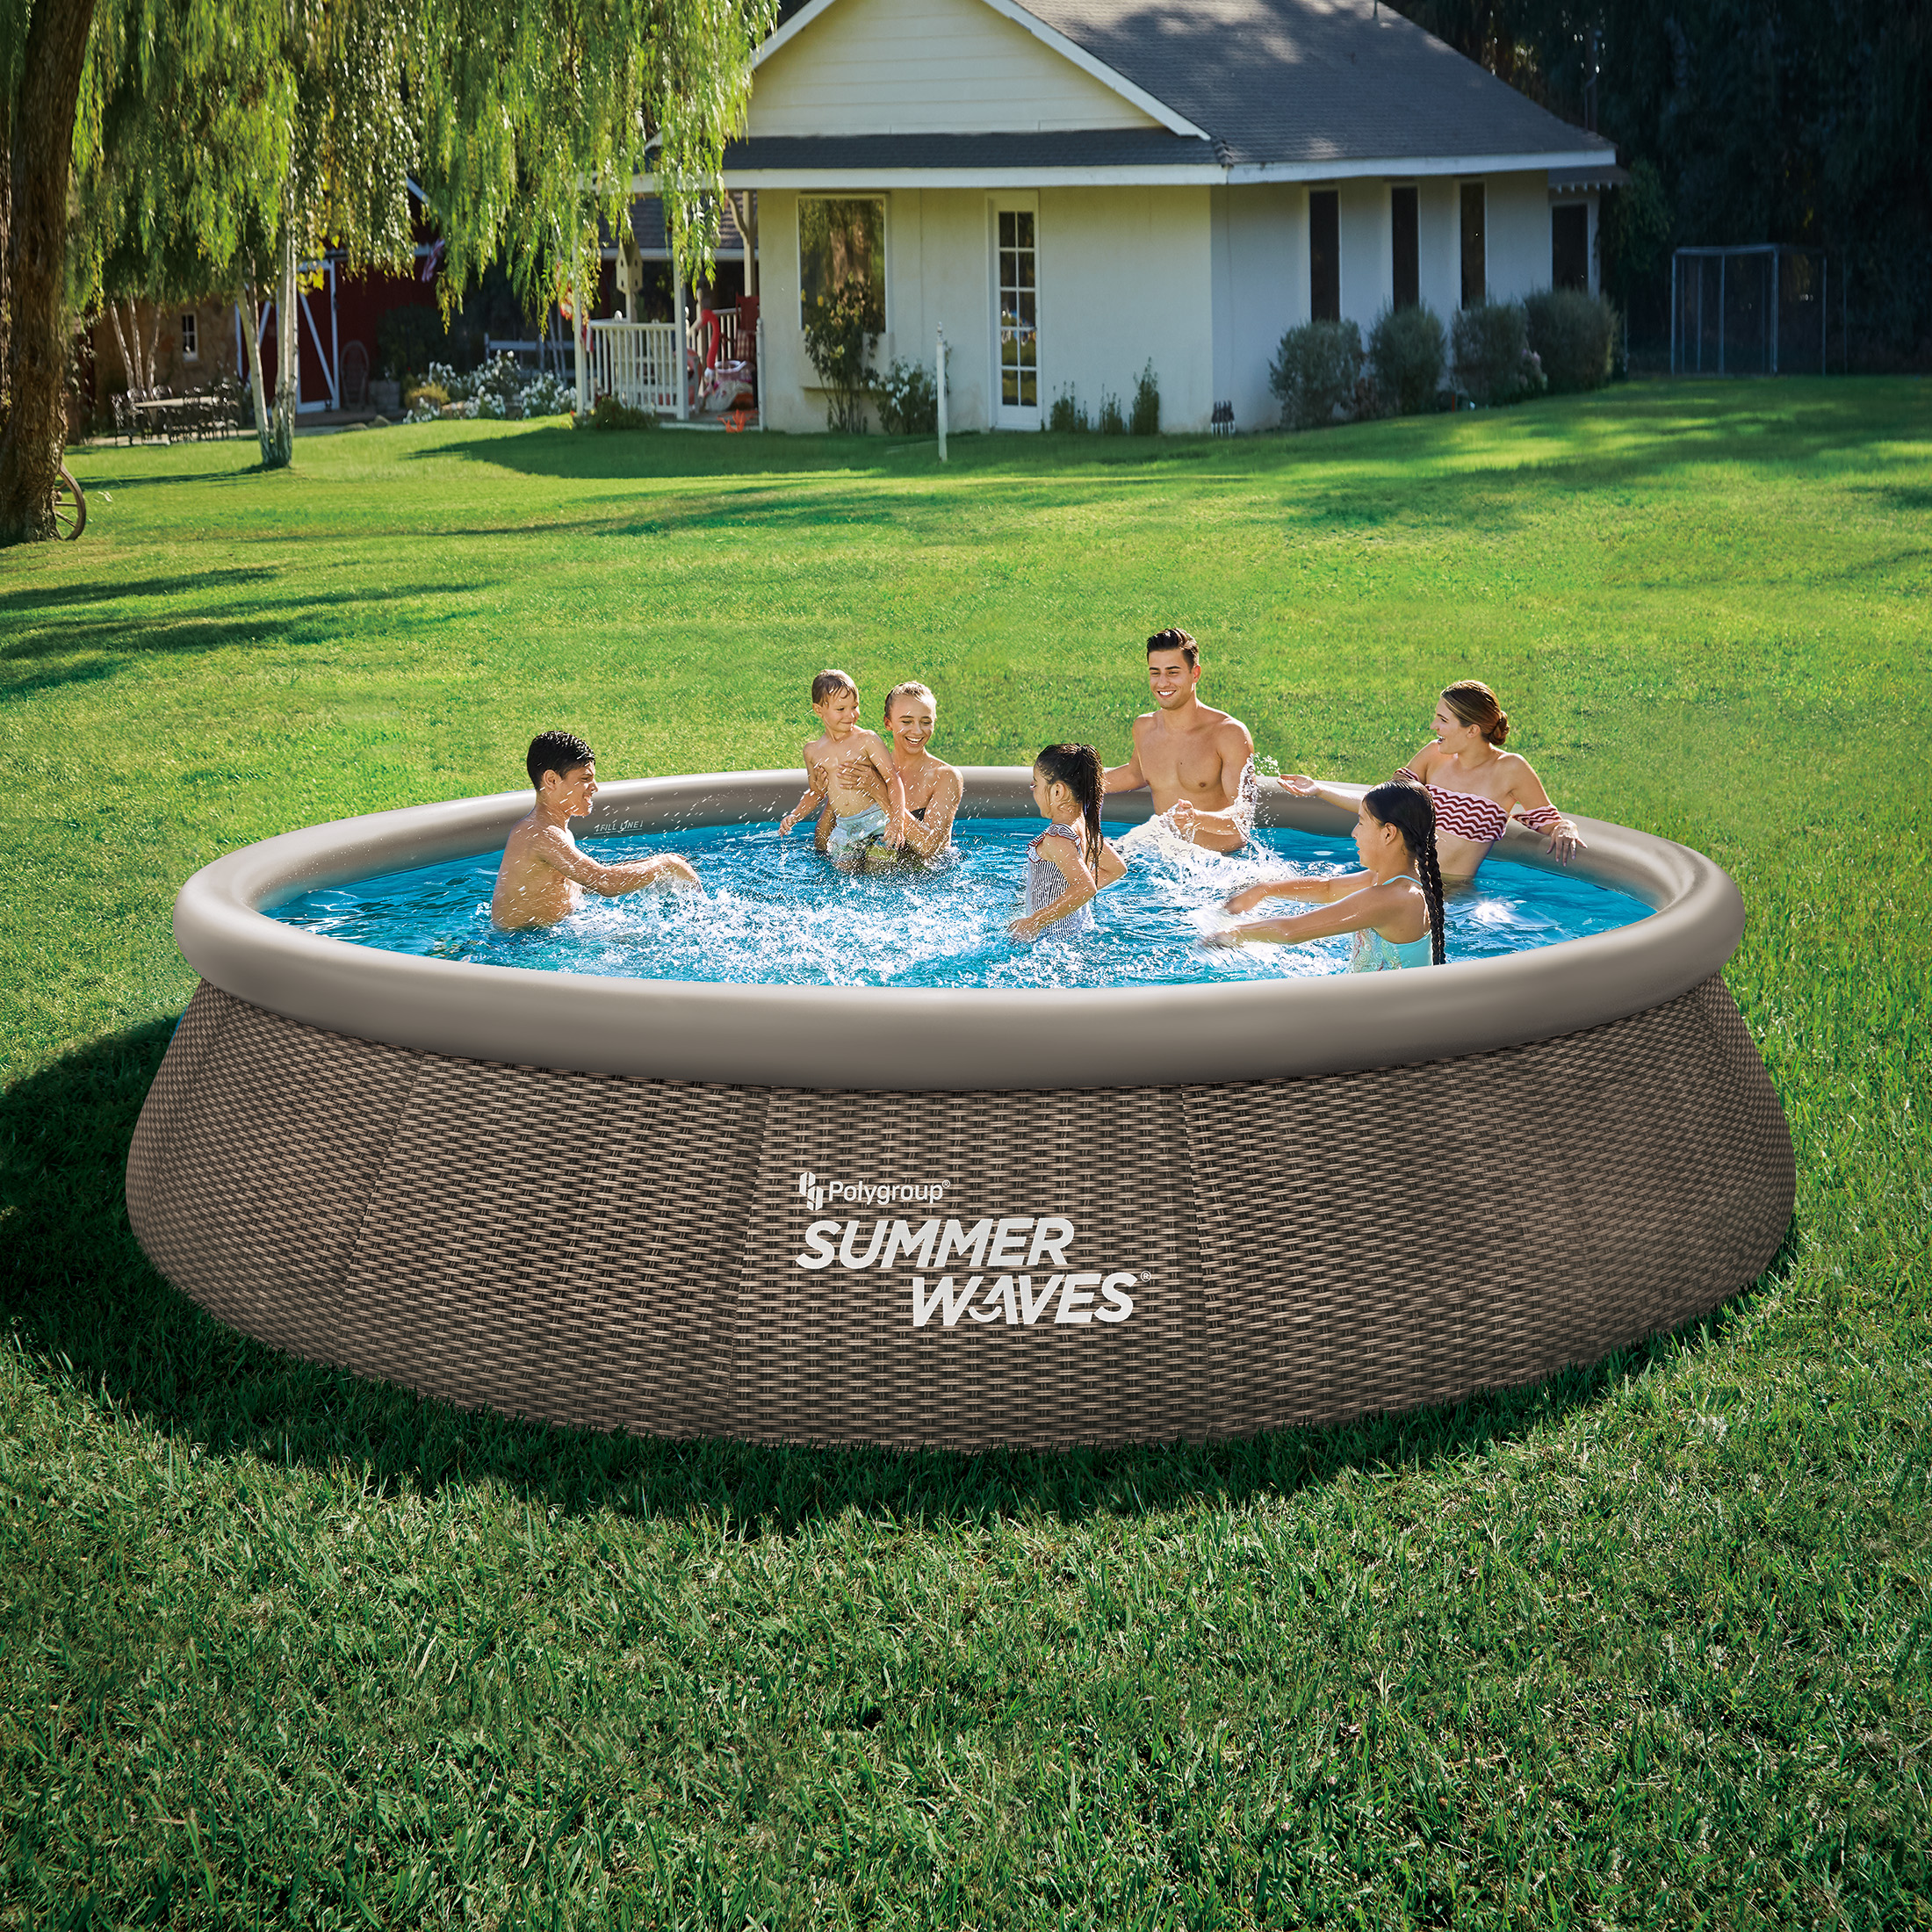 Summer Waves 15 ft Dark Double Rattan Quick Set Pool, Round, Ages 6+, Unisex - image 3 of 5